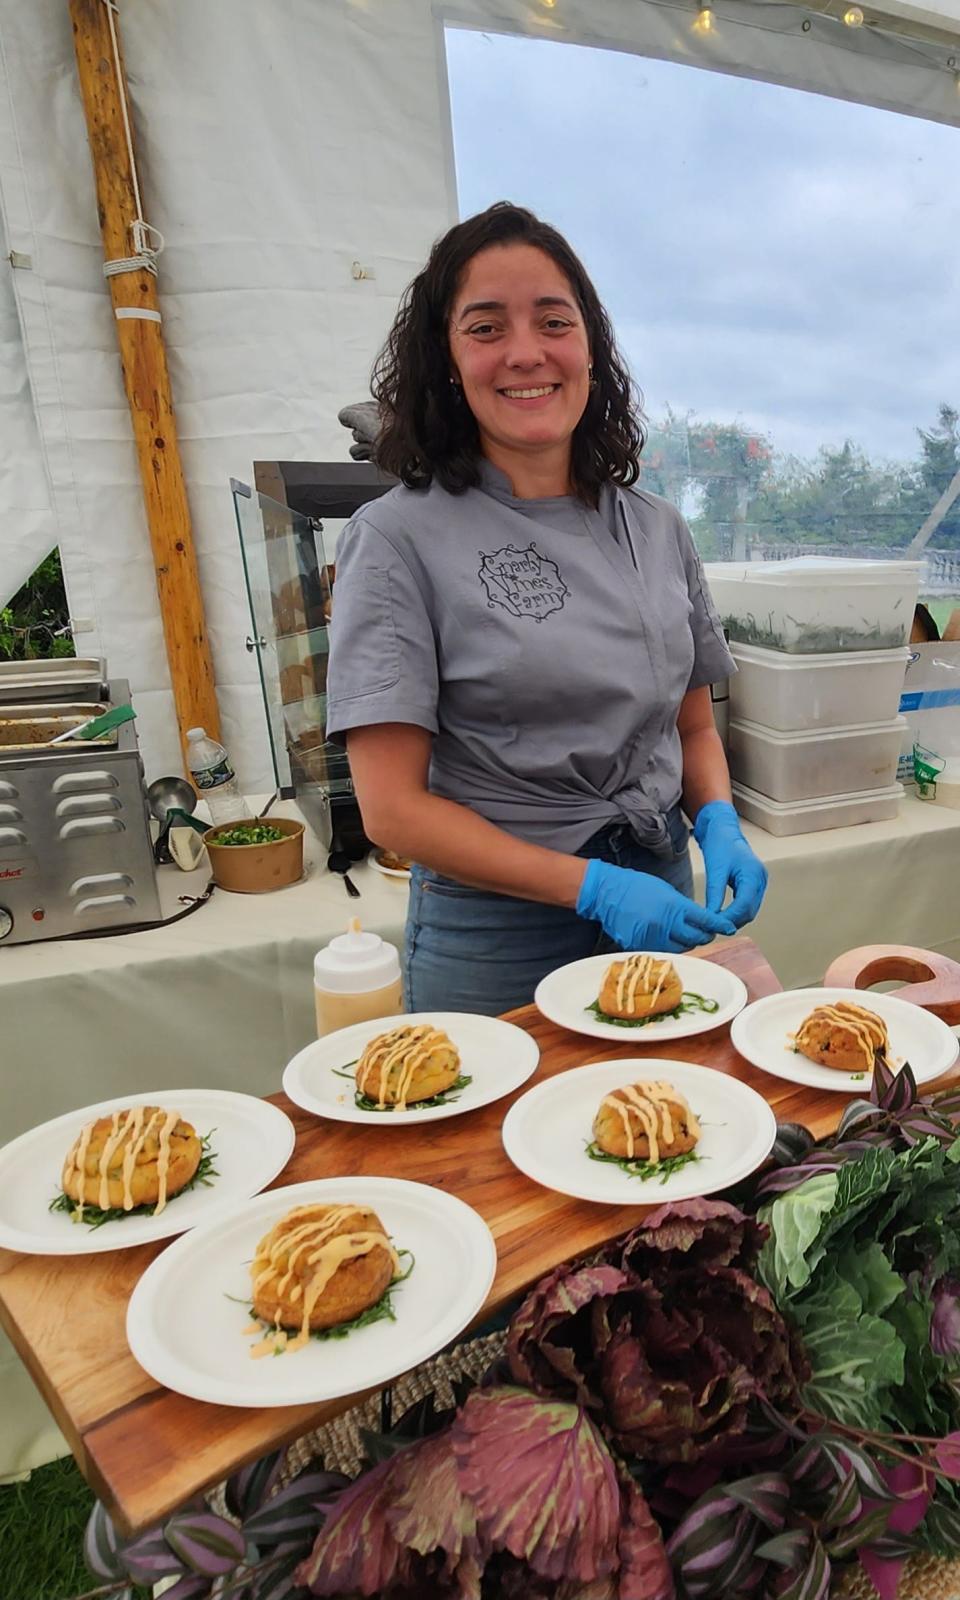 Gnarly Vine's Farm's Ester Bishop, shown here, and Joe Bishop are among Farm Fresh R.I.'s farmers of fauna, pasture-raising animals on 16 acres of coastal land in Tiverton